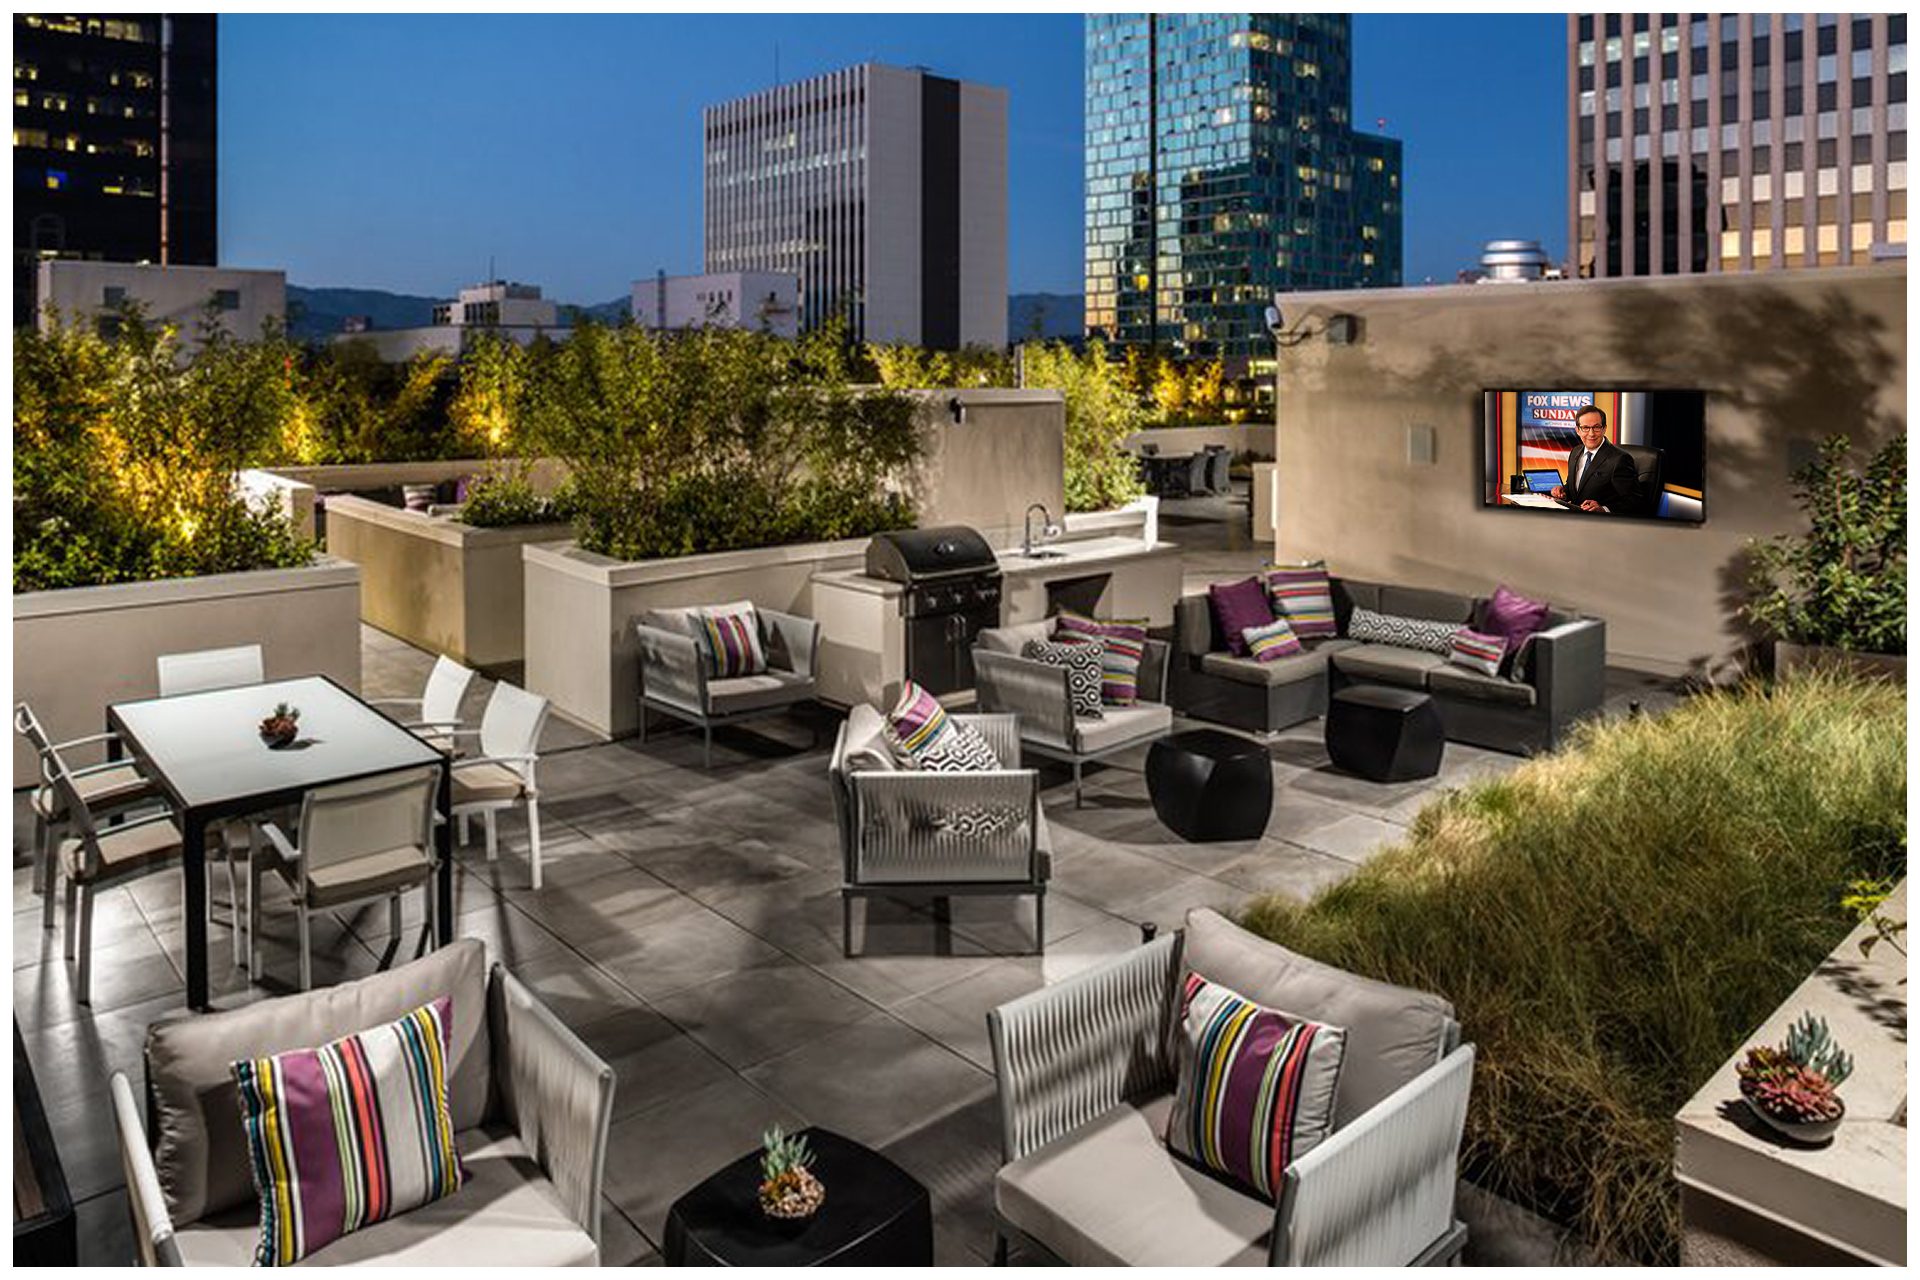 ROOFTOP/SKY DECK PROVISIONS Roof-top Music and TV & WiFi; Music & TV provisions controlled  from leasing office.